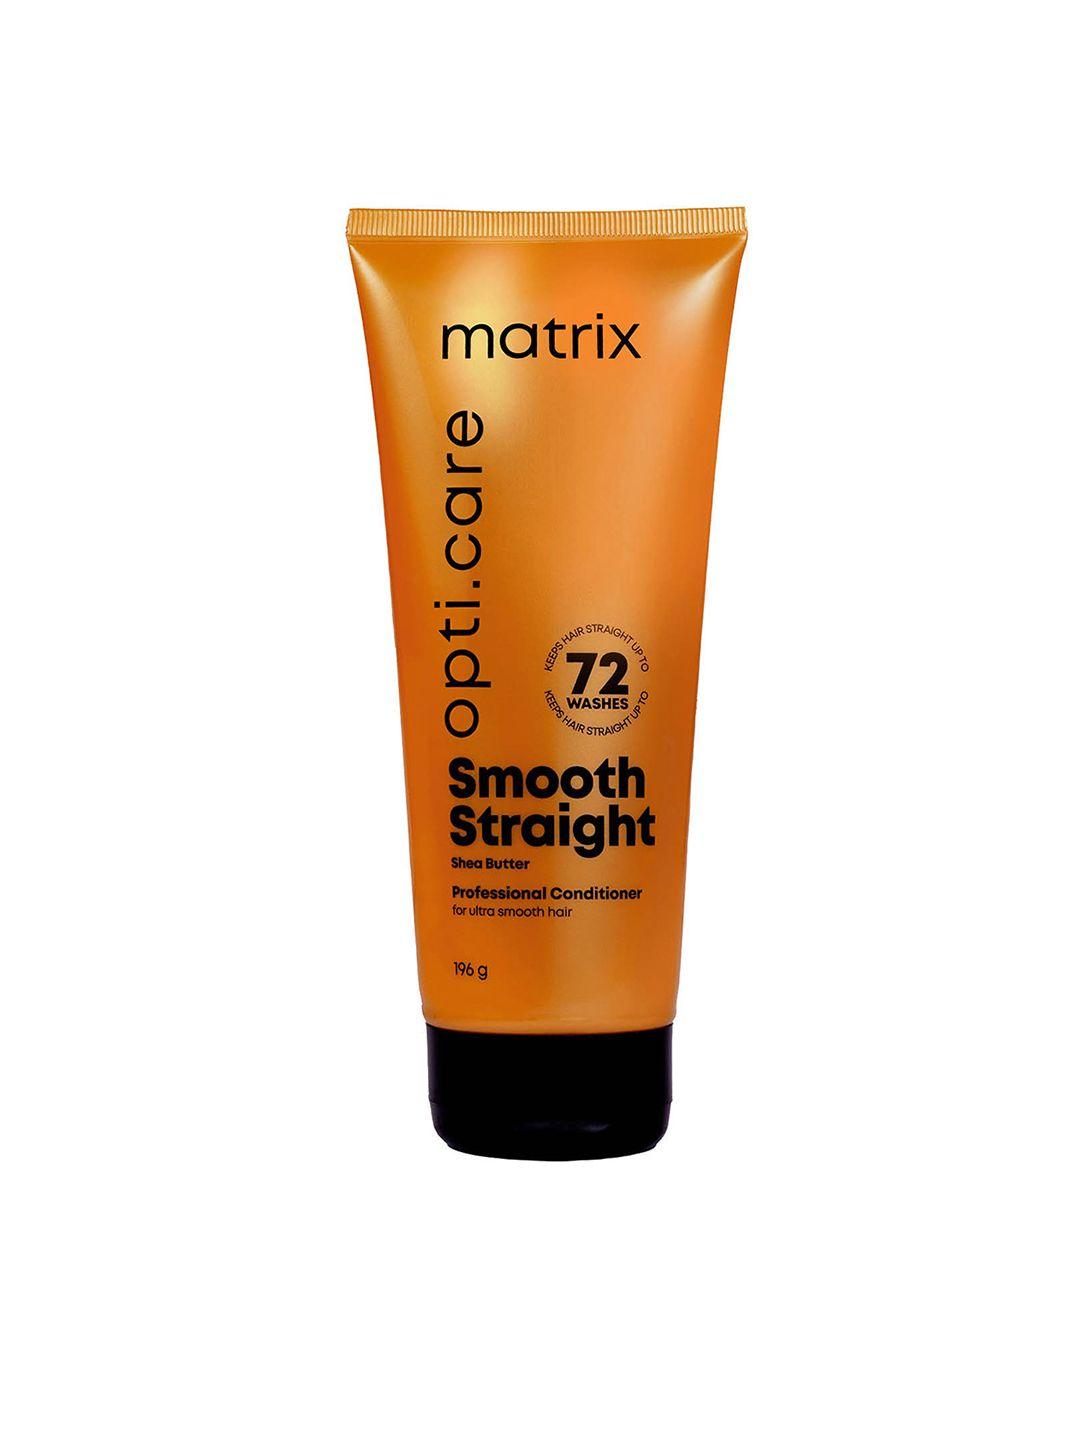 matrix opti care smooth straight professional conditioner with shea butter - 196 g